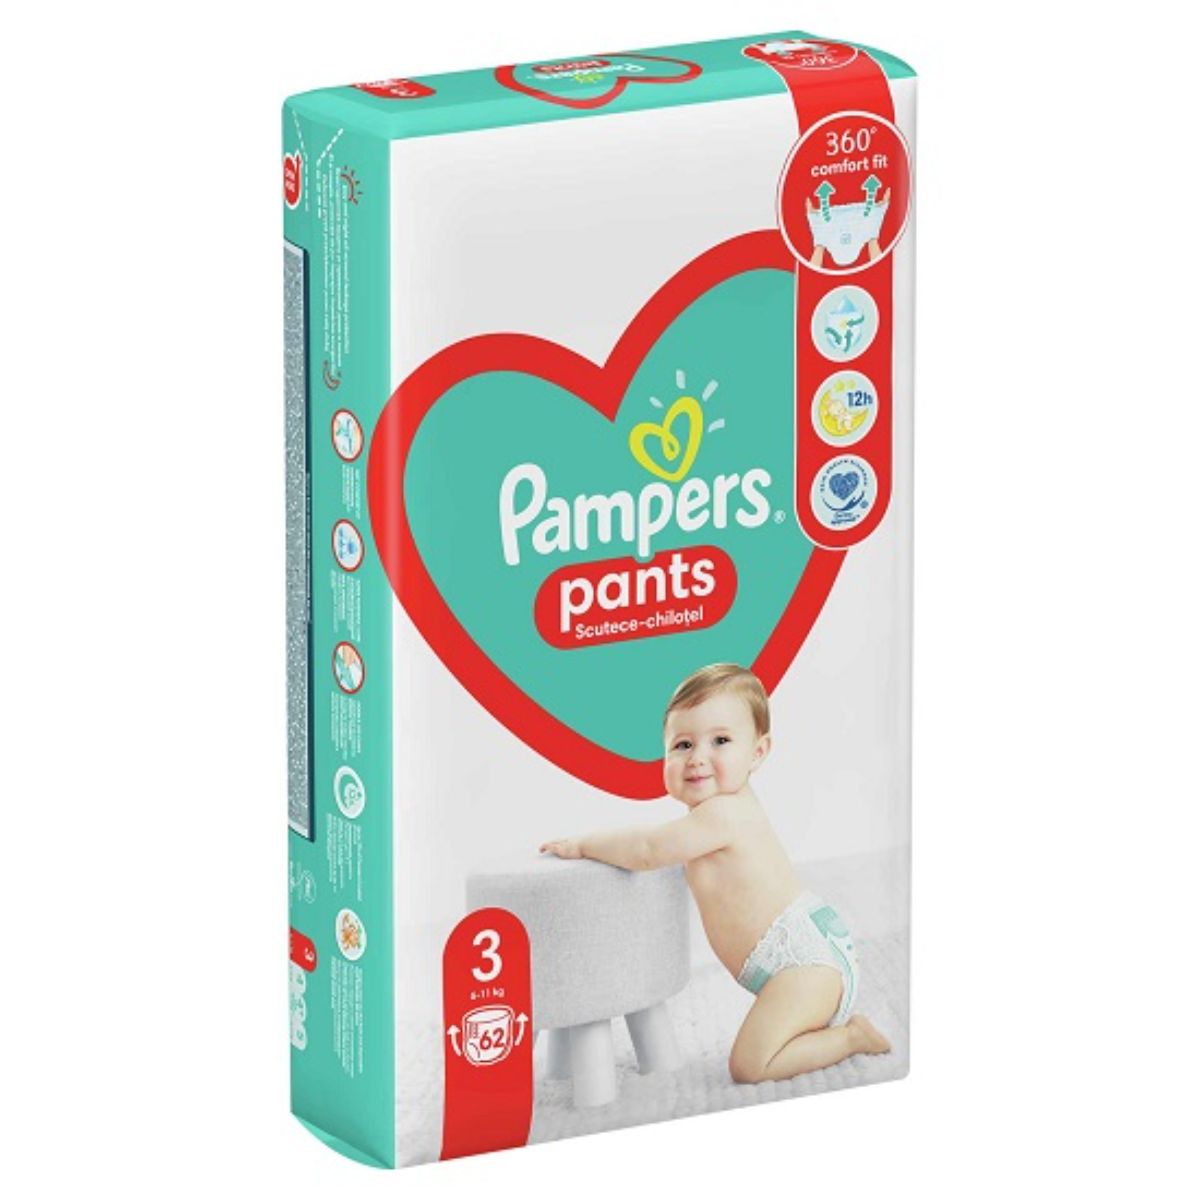 Scutece Pampers, 3 Chilotel Act Baby, 6-11 kg, 62 buc 6-11 imagine 2022 protejamcopilaria.ro